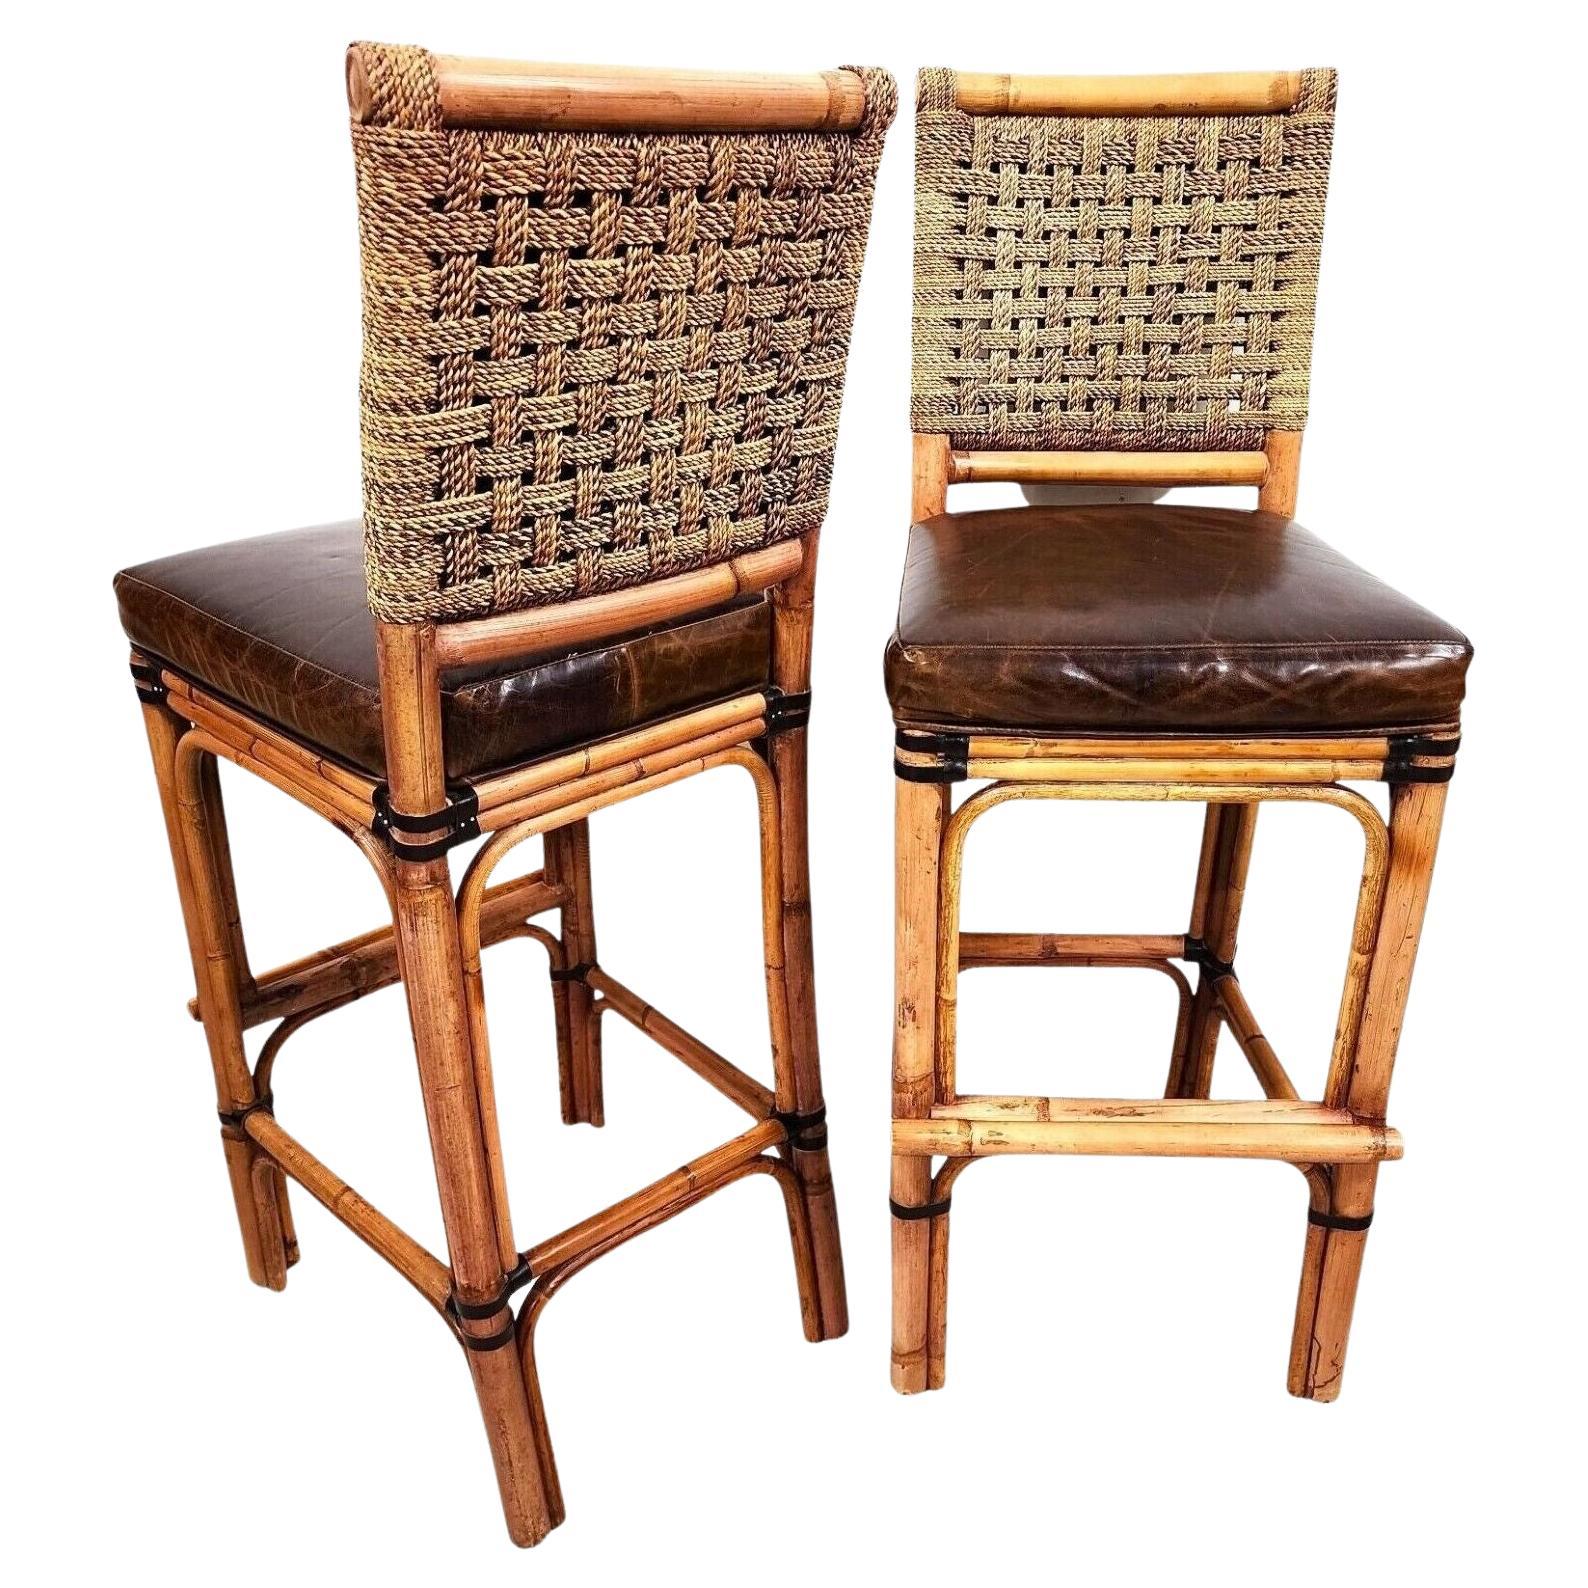 2 Bamboo Leather Barstools with Rattan & Braided Rope by Palecek